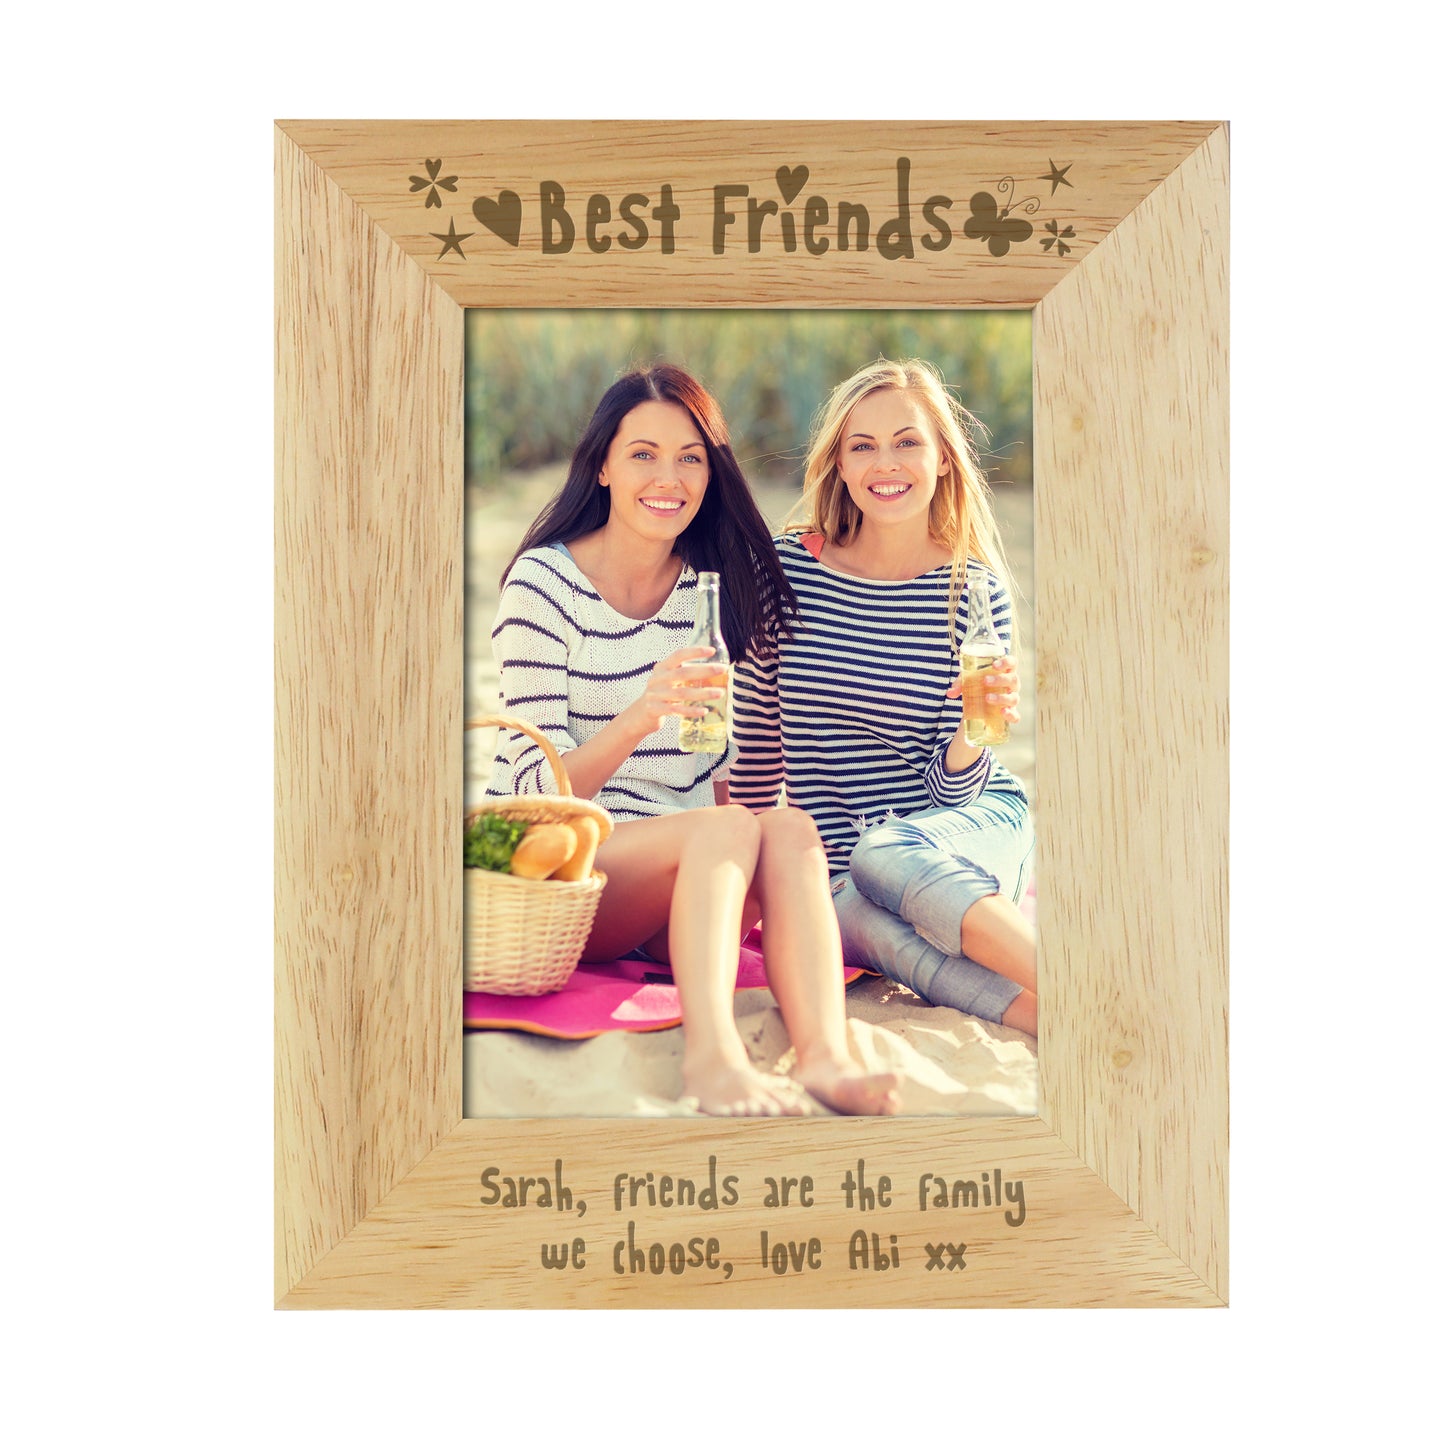 Personalised Best Friends 5x7 Wooden Photo Frame - Personalise It!